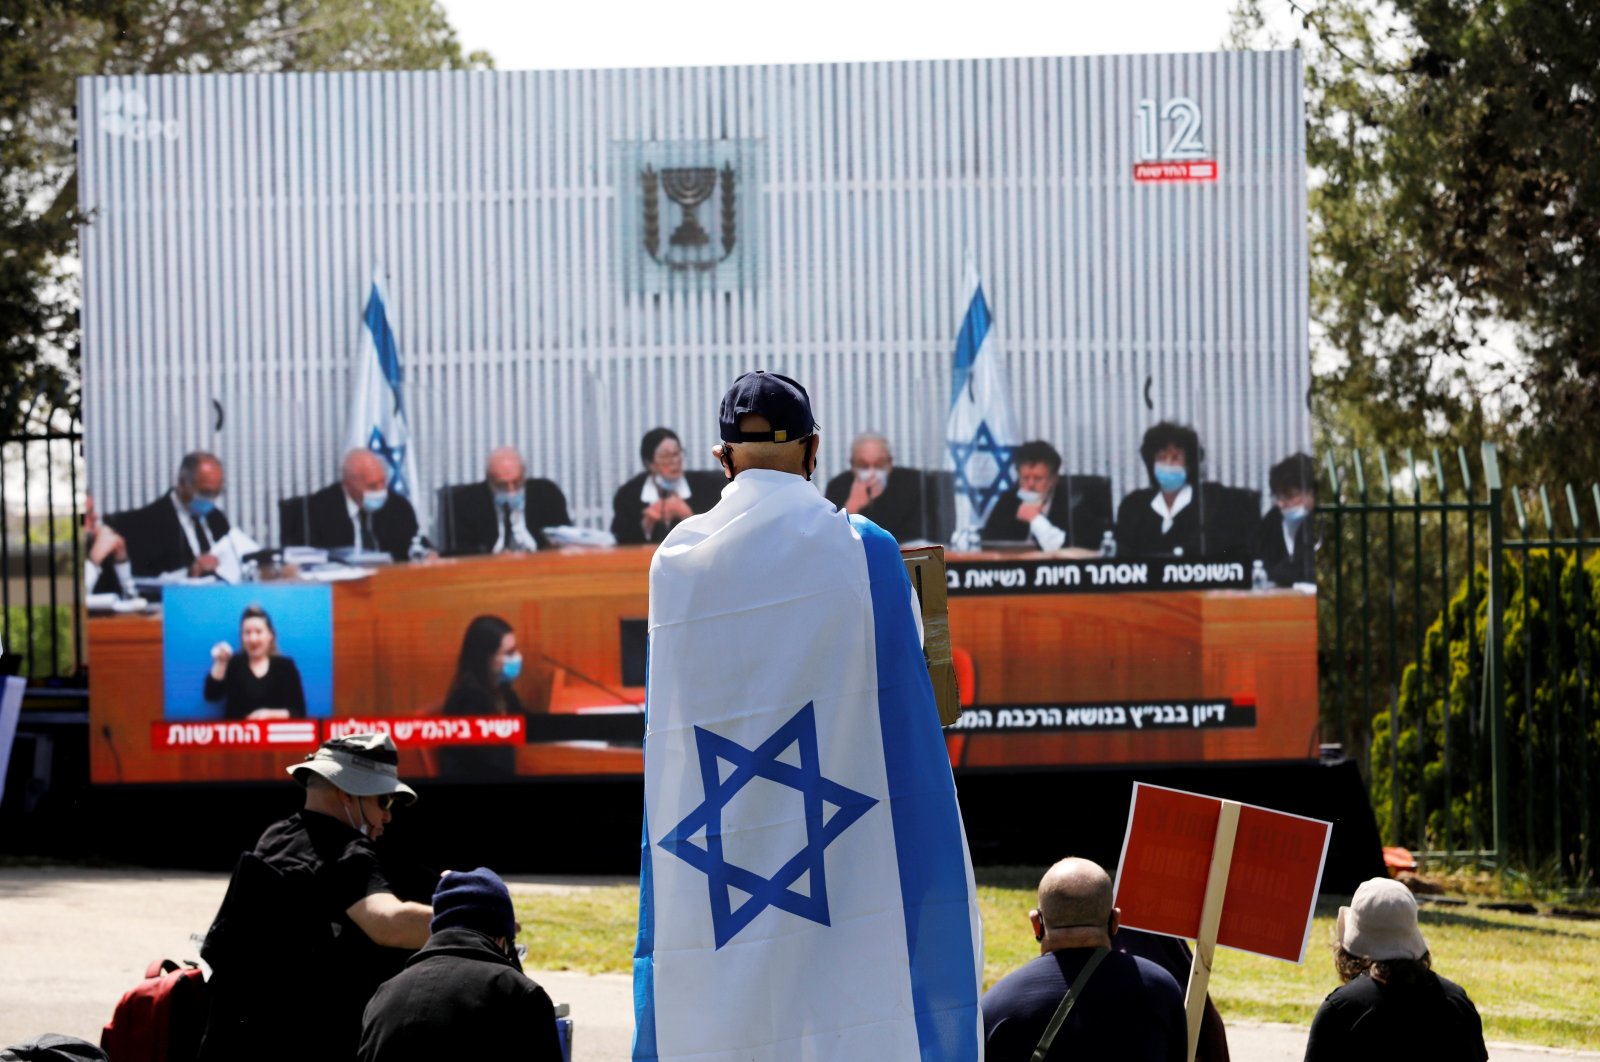 Israelis protest, in front of a placard with the photo of the High Court judges outside the Knesset against Prime minister Benjamin Netanyahu in Jerusalem, May 3, 2020. (Reuters Photo)